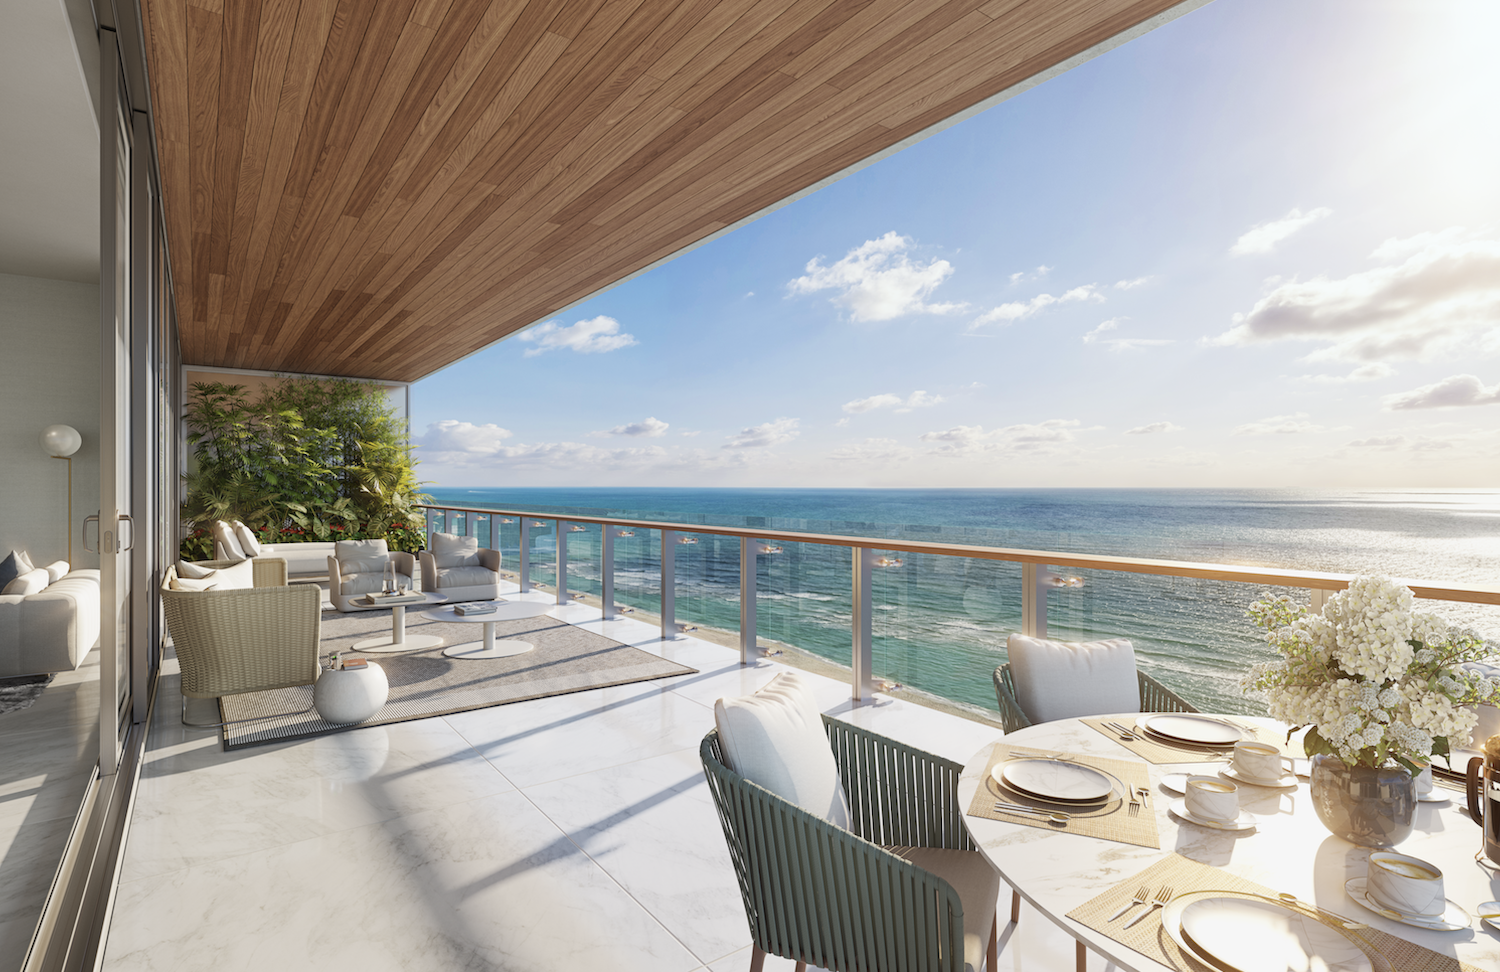 Terrace. Rendering courtesy of DBOX.